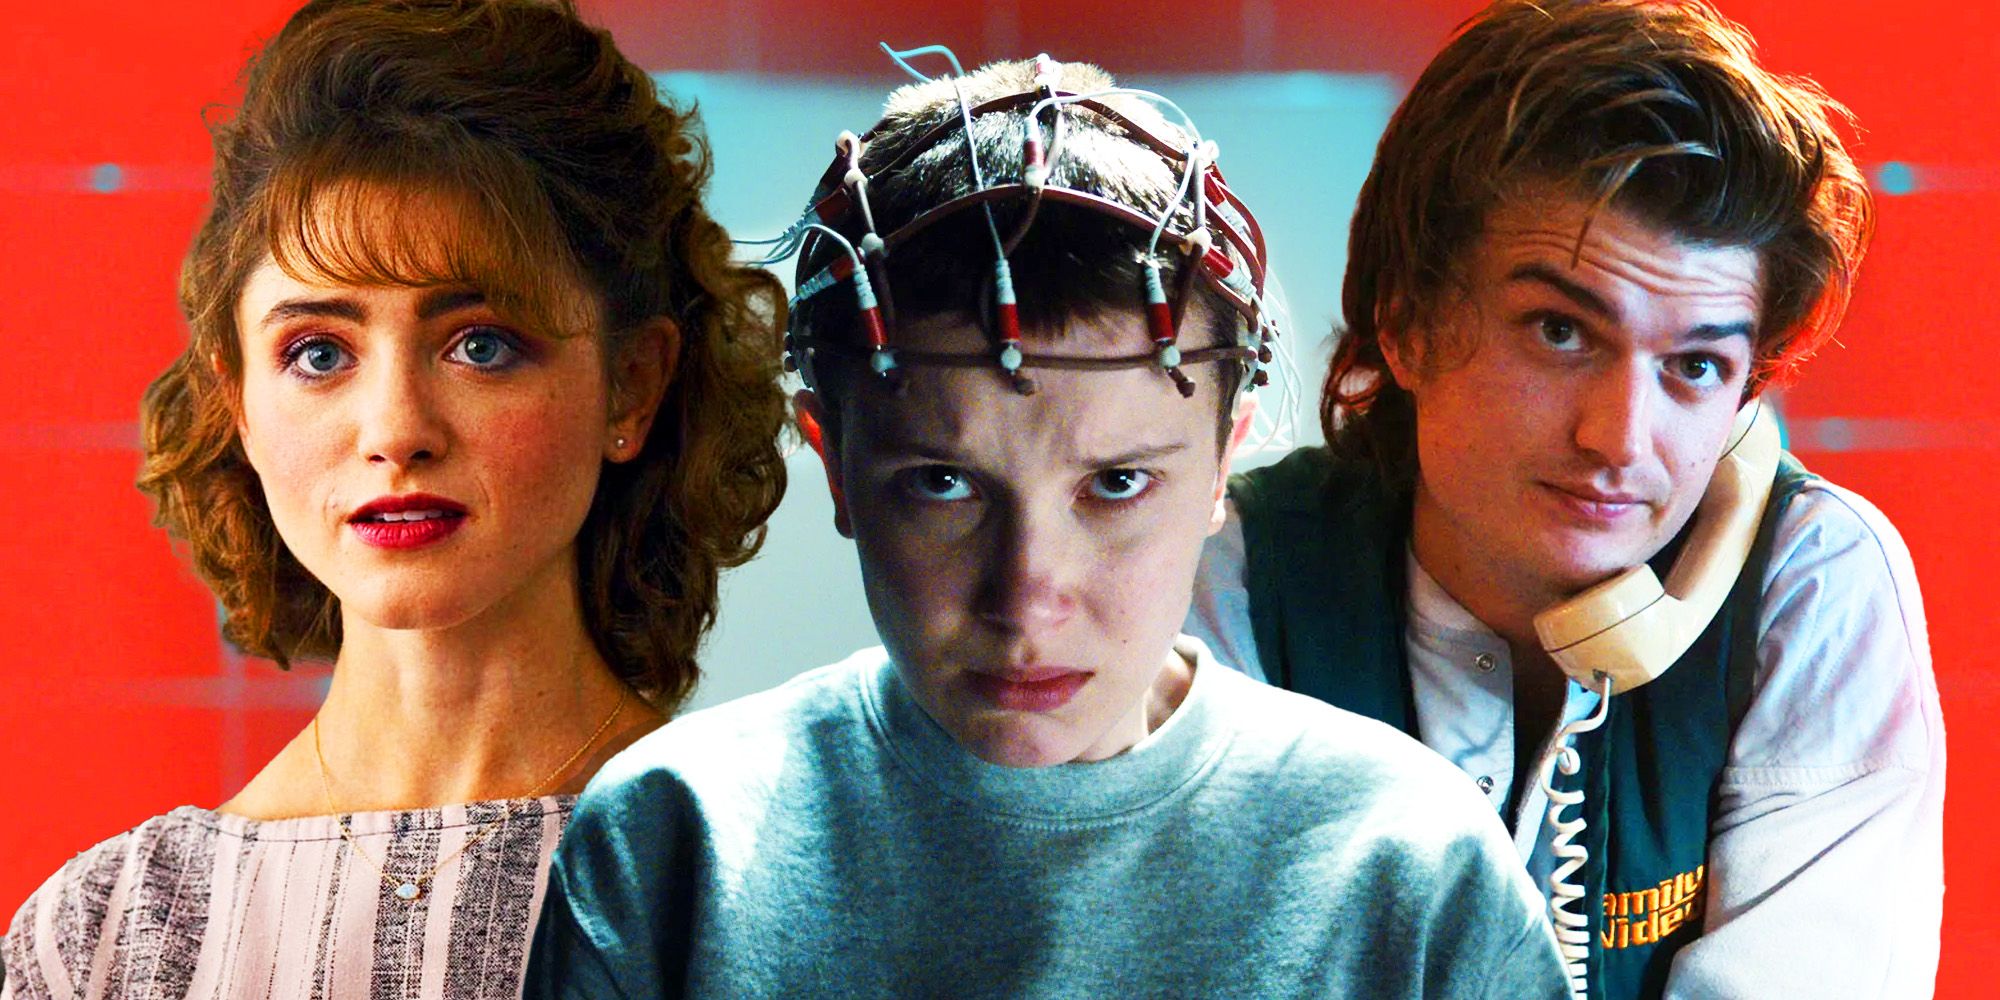 Scared Eleven, Nancy, and Steve from Stranger Things